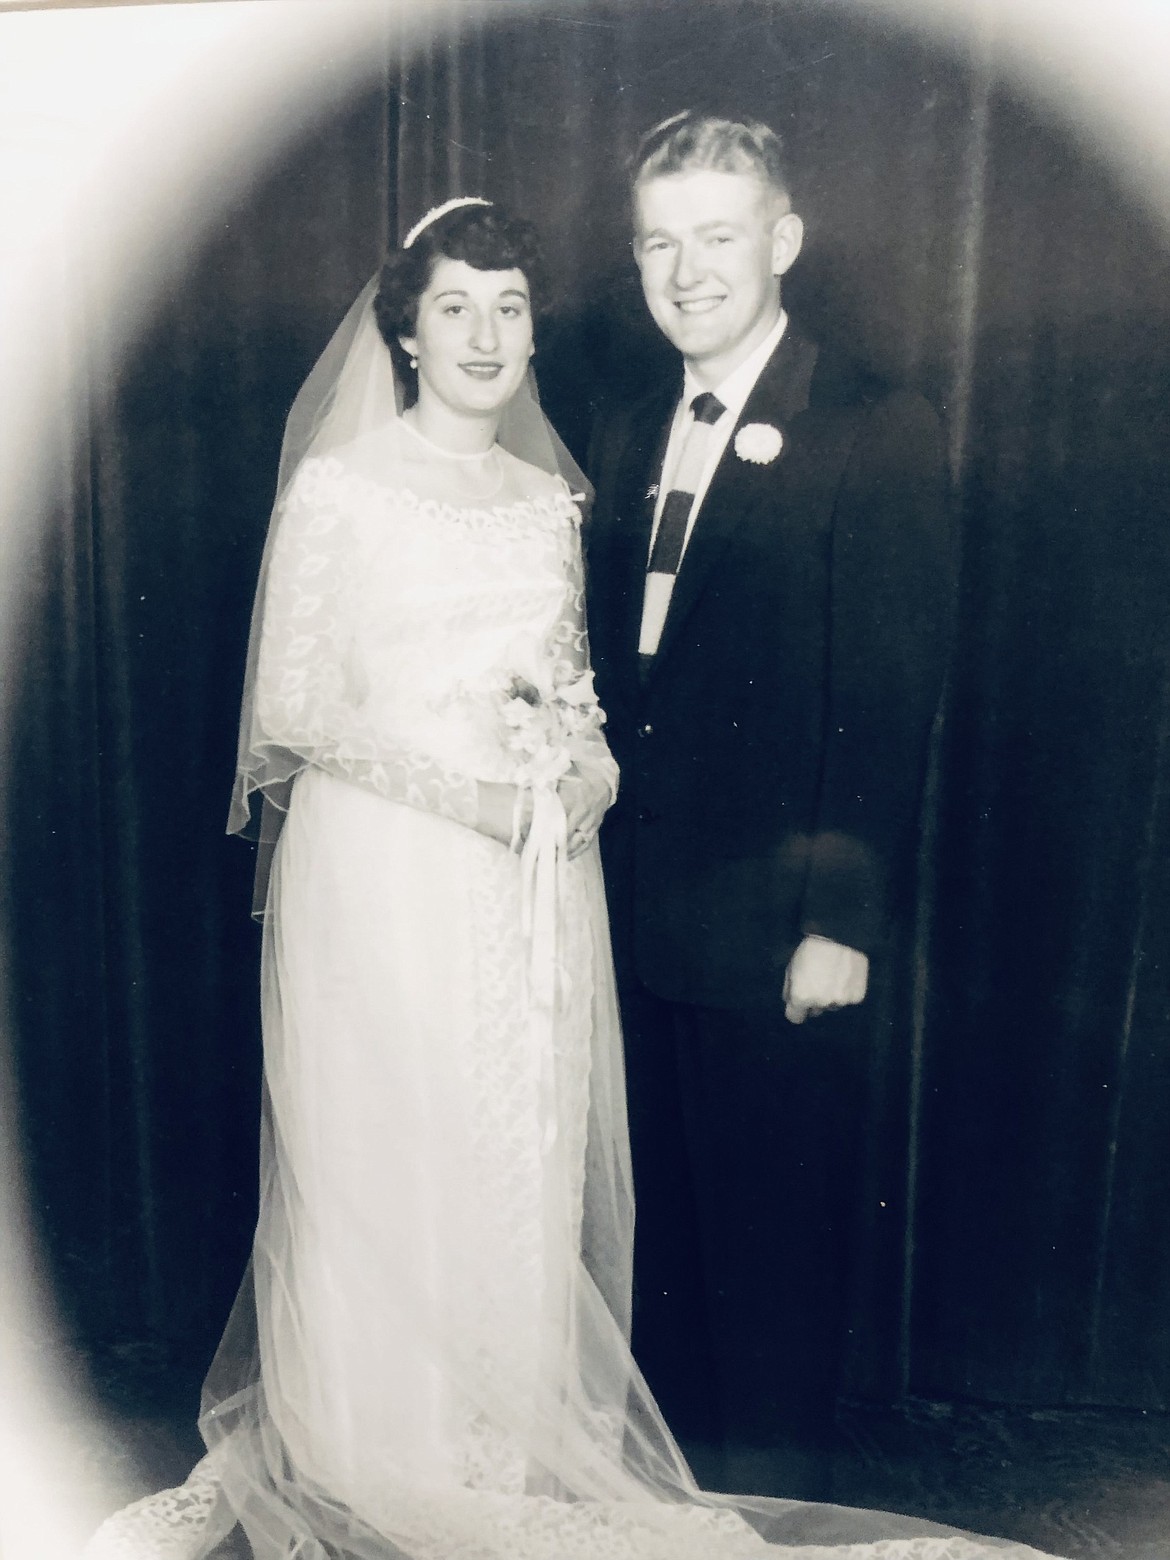 Tom and Lois Getzfrid, 70th Anniversary